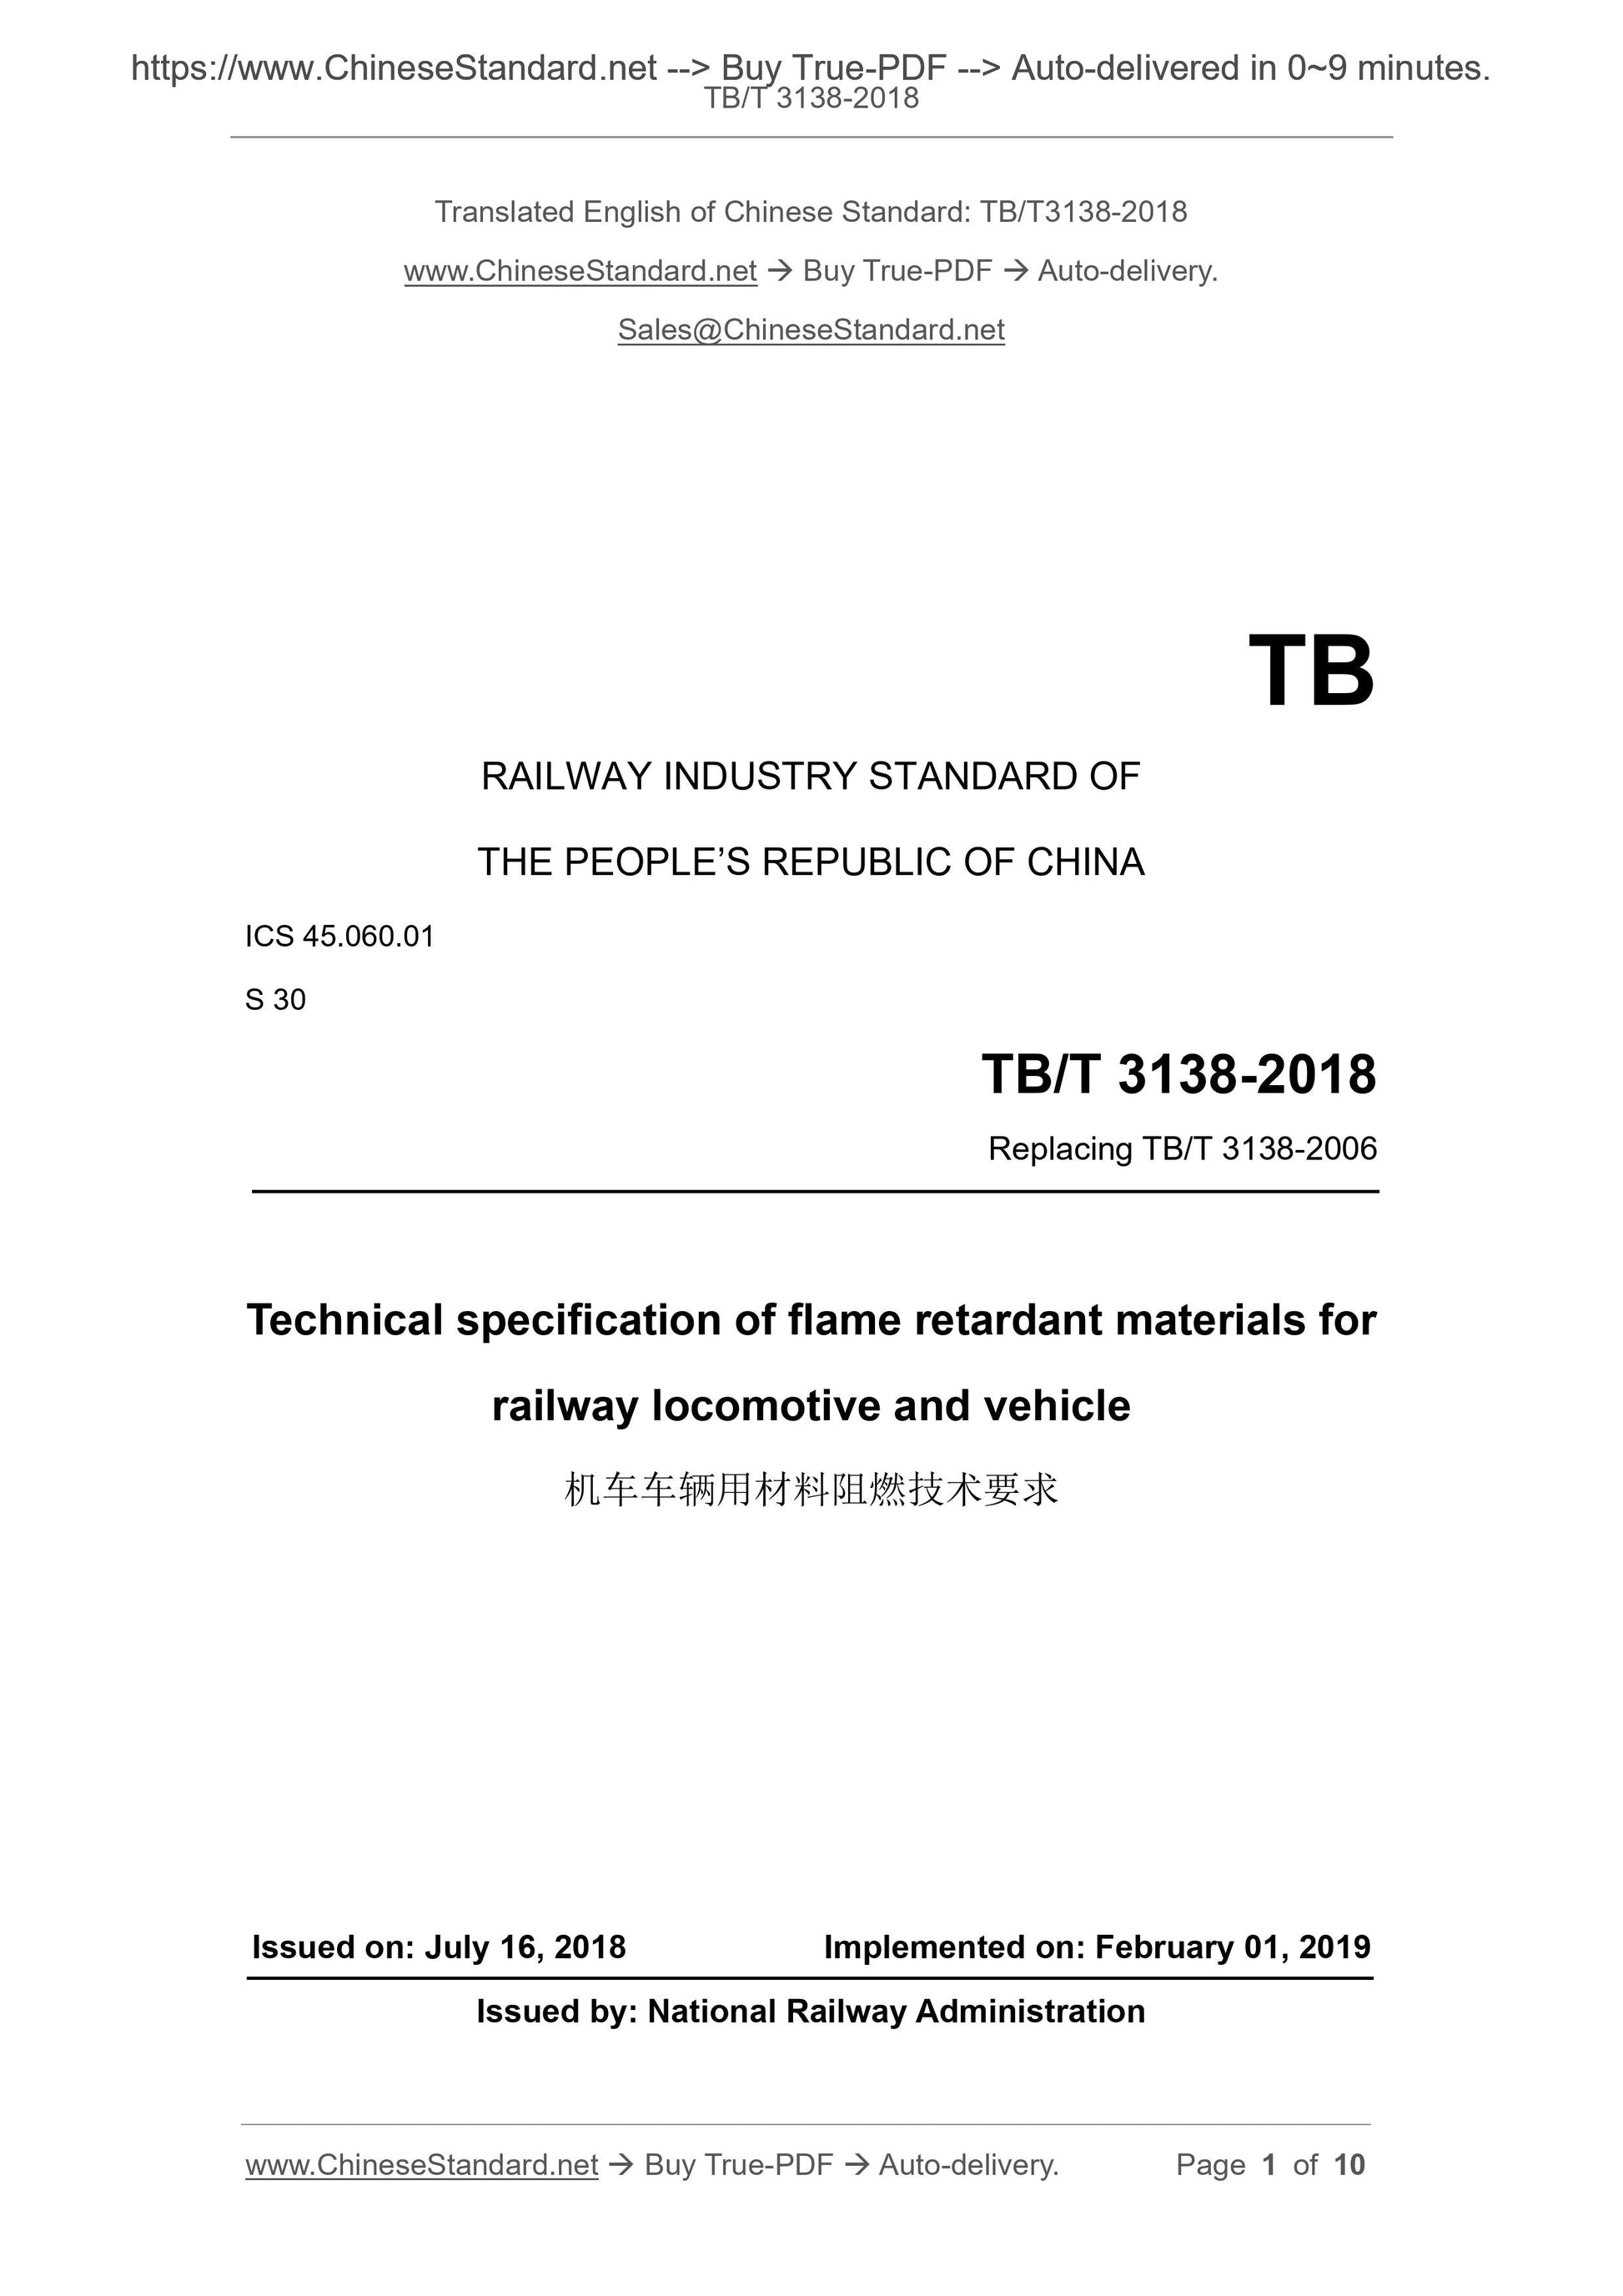 TB/T 3138-2018 Page 1